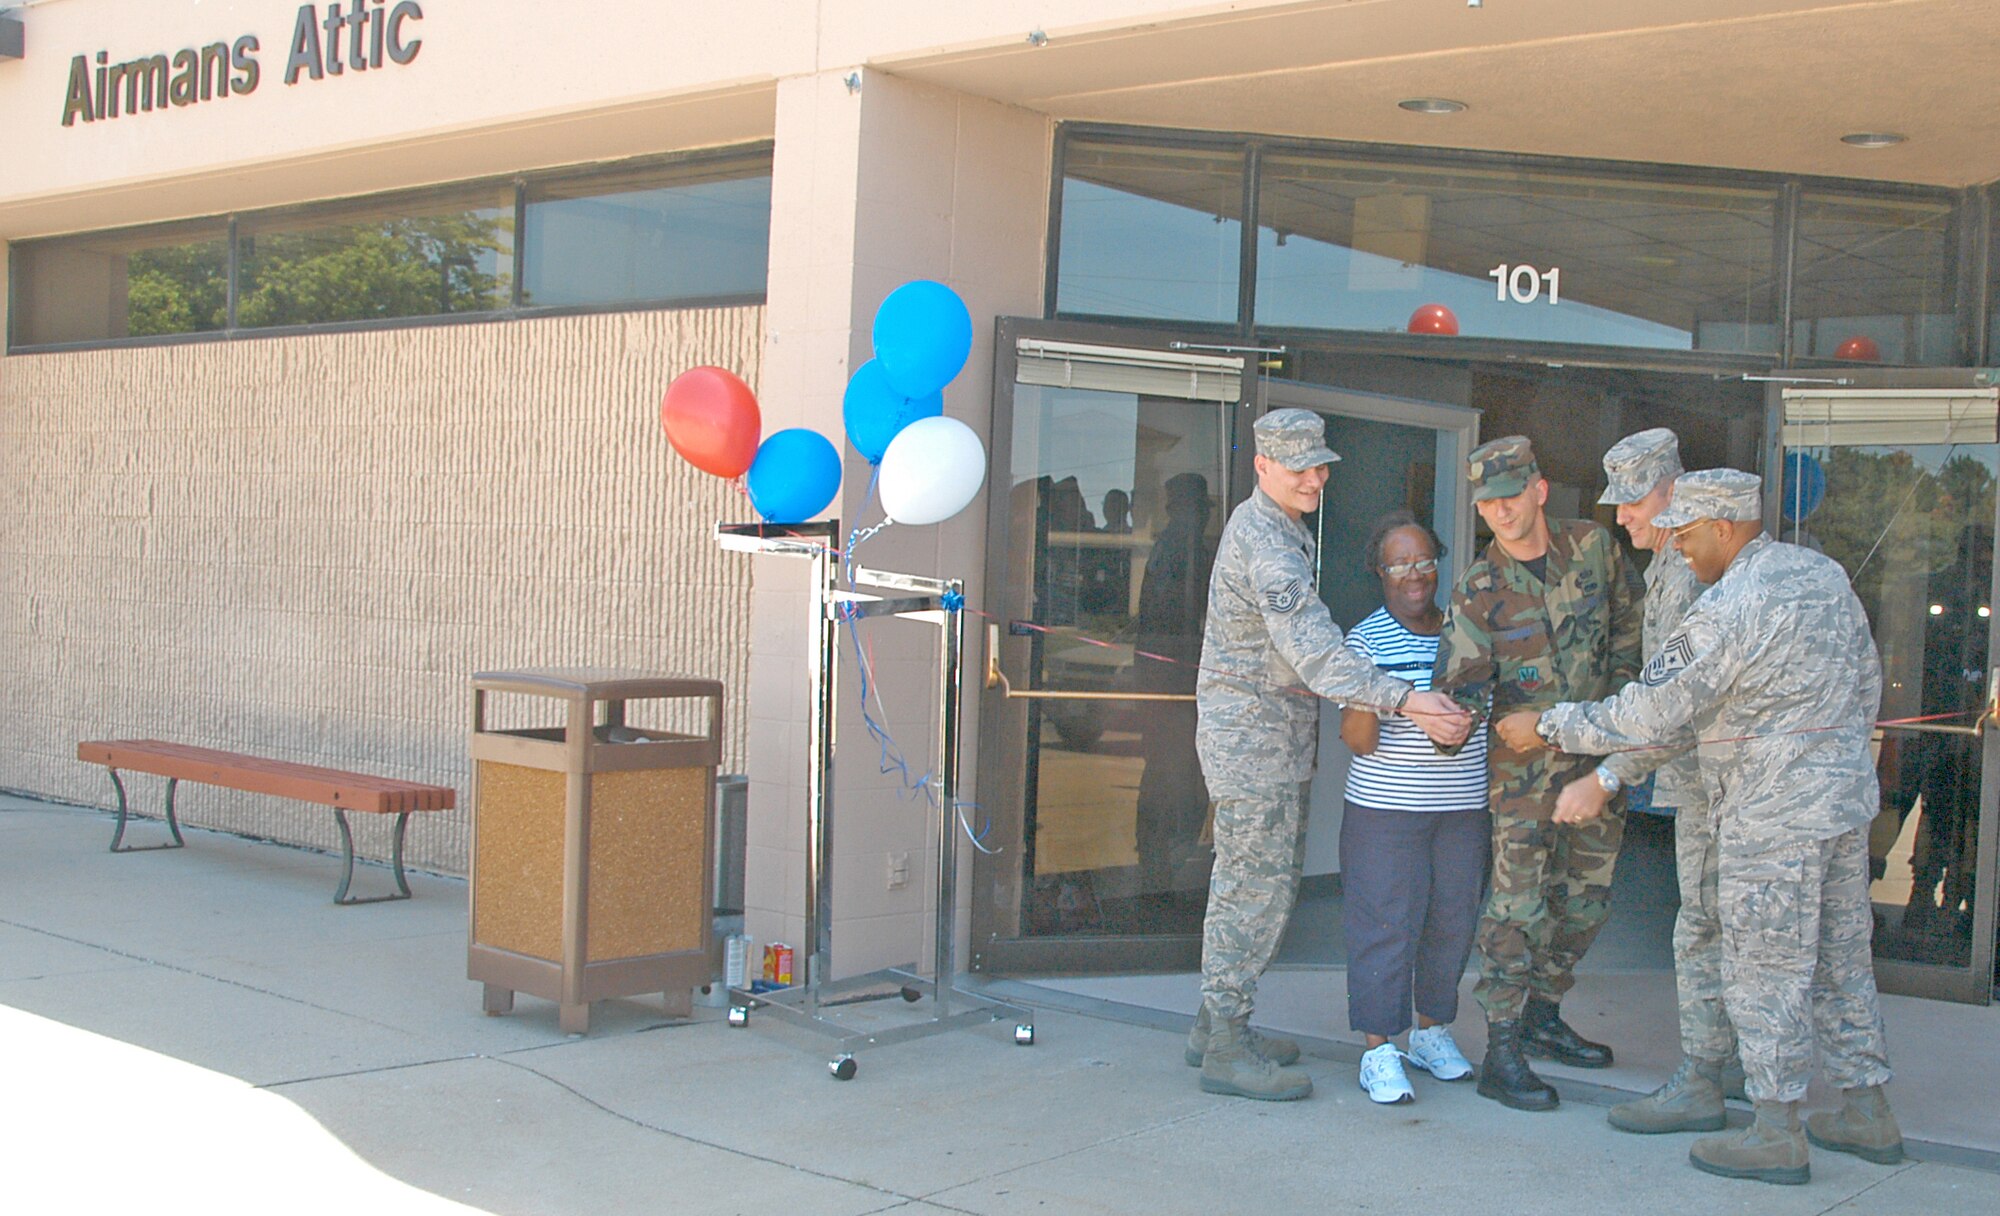 (From left to right) Tech Sgt. Eugene Skidmore, 55th Wing Command Post; Kristine Tate, Airman's Attic civilian volunteer; Master Sgt. Dominic Dumbra, 55th Force Support Squadron first sergeant; Col. Robert Maness, 55th Wing vice commander; and Chief Master Sgt. Kenneth Funderburg, 55th Wing command chief, commemorate the new location of the Airman's Attic with a ribbon cutting at the grand opening here July 2.   (Courtesy Photo)       